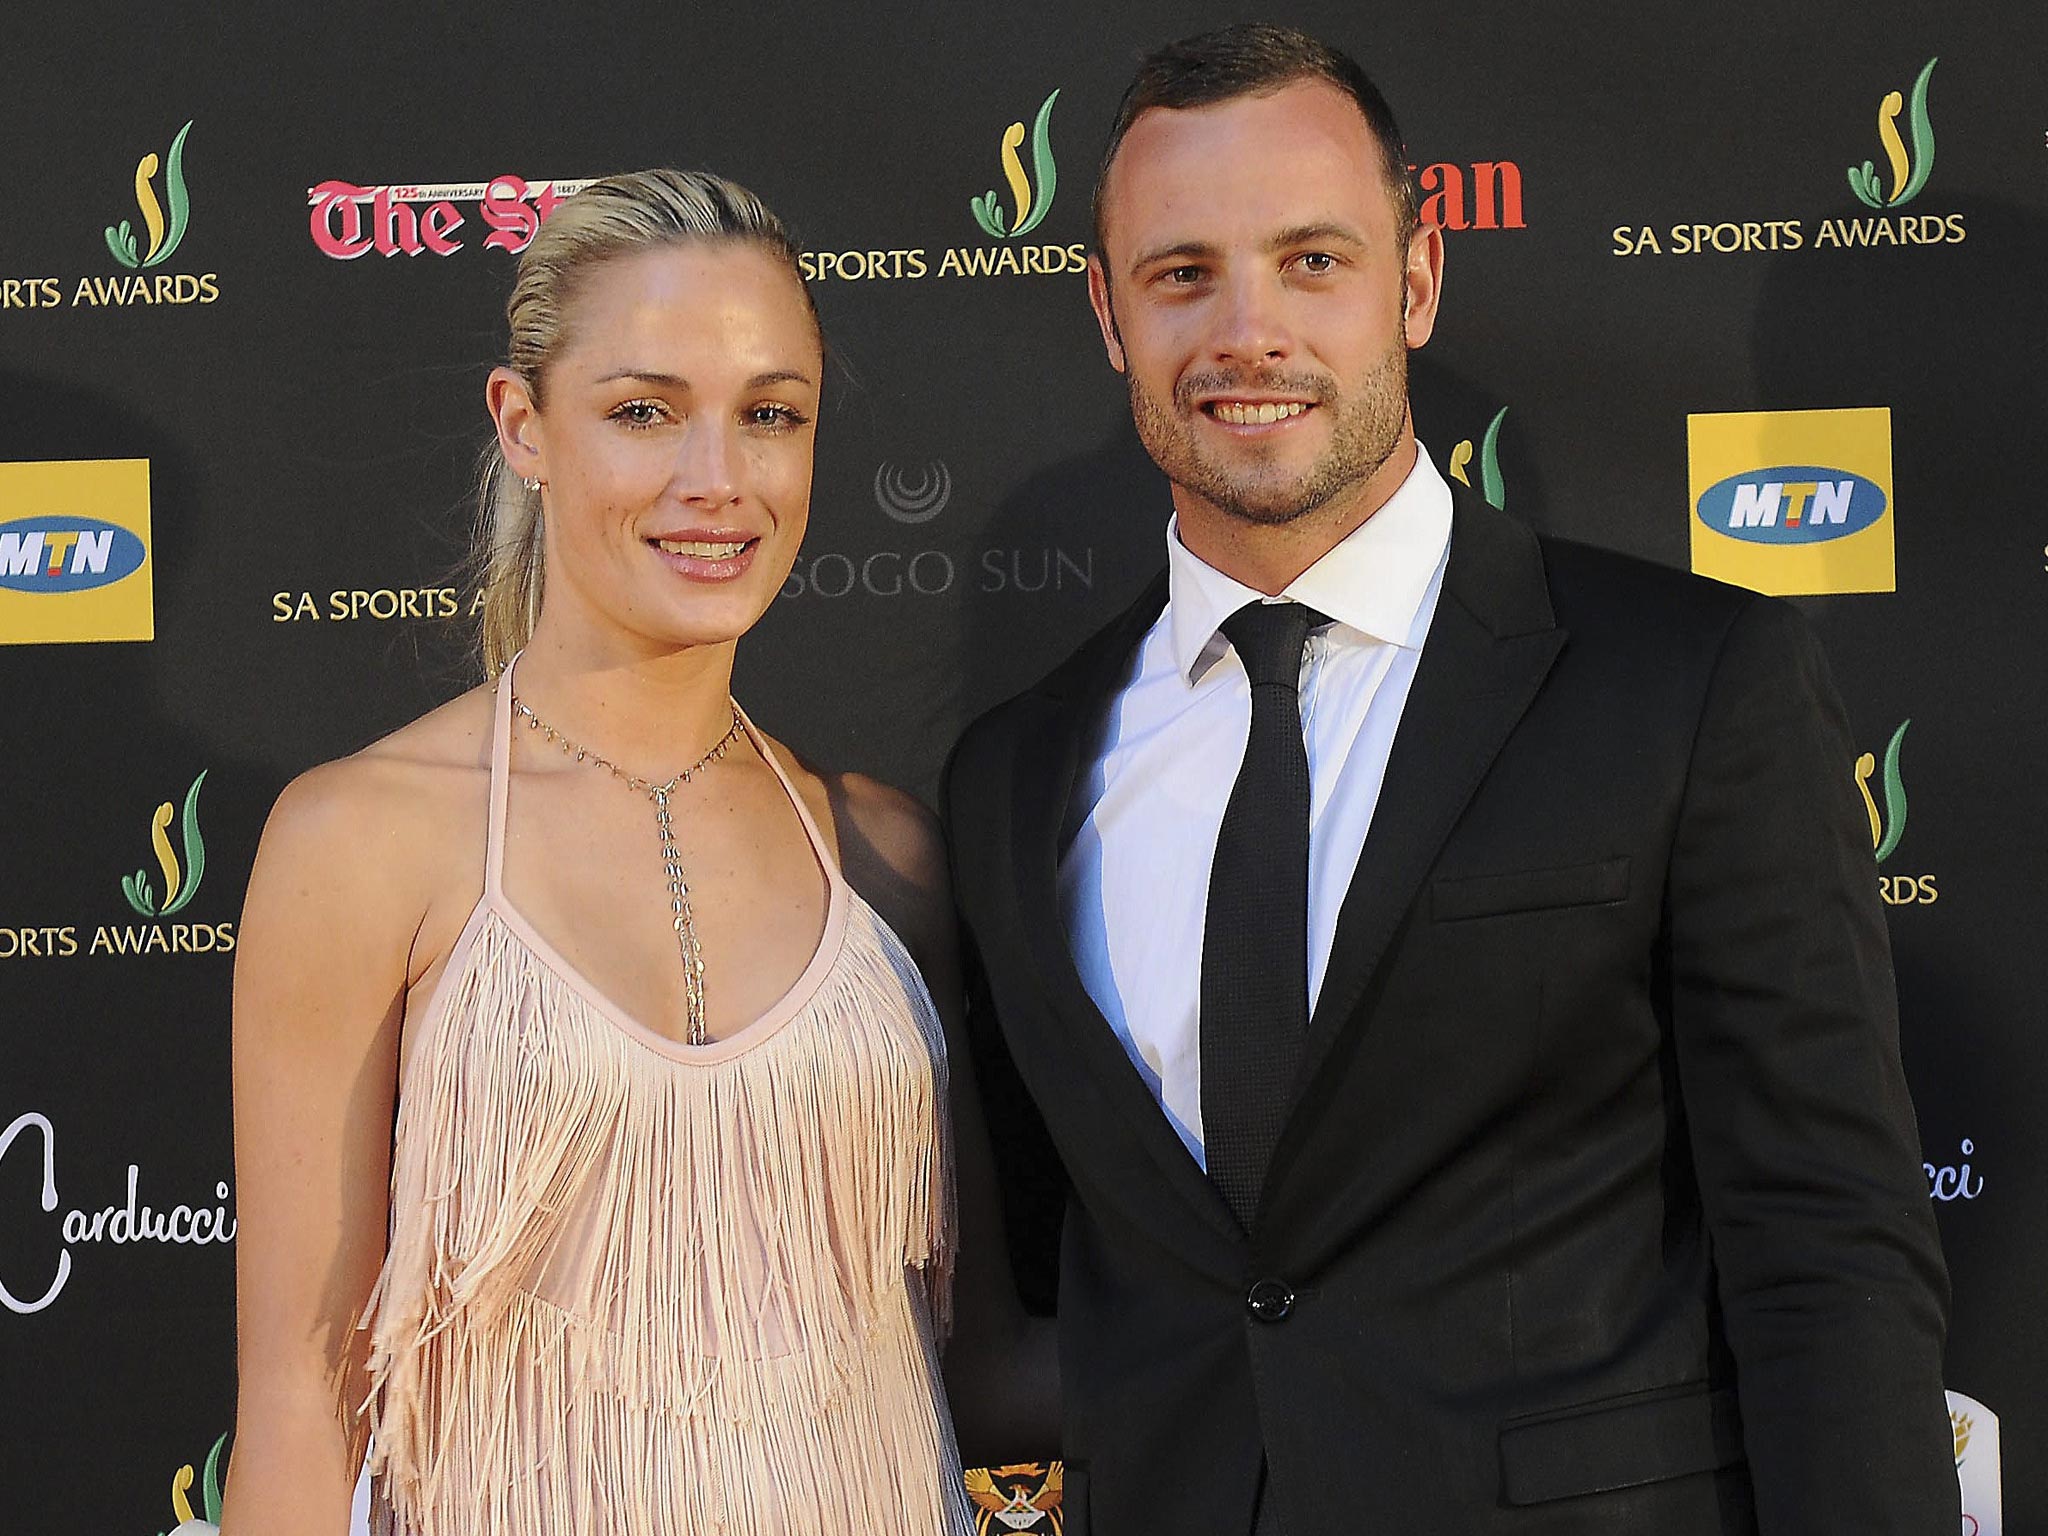 South African paralympic and Olympic sprinter Oscar Pistorius with his girlfriend and model Reeva Steenkamp